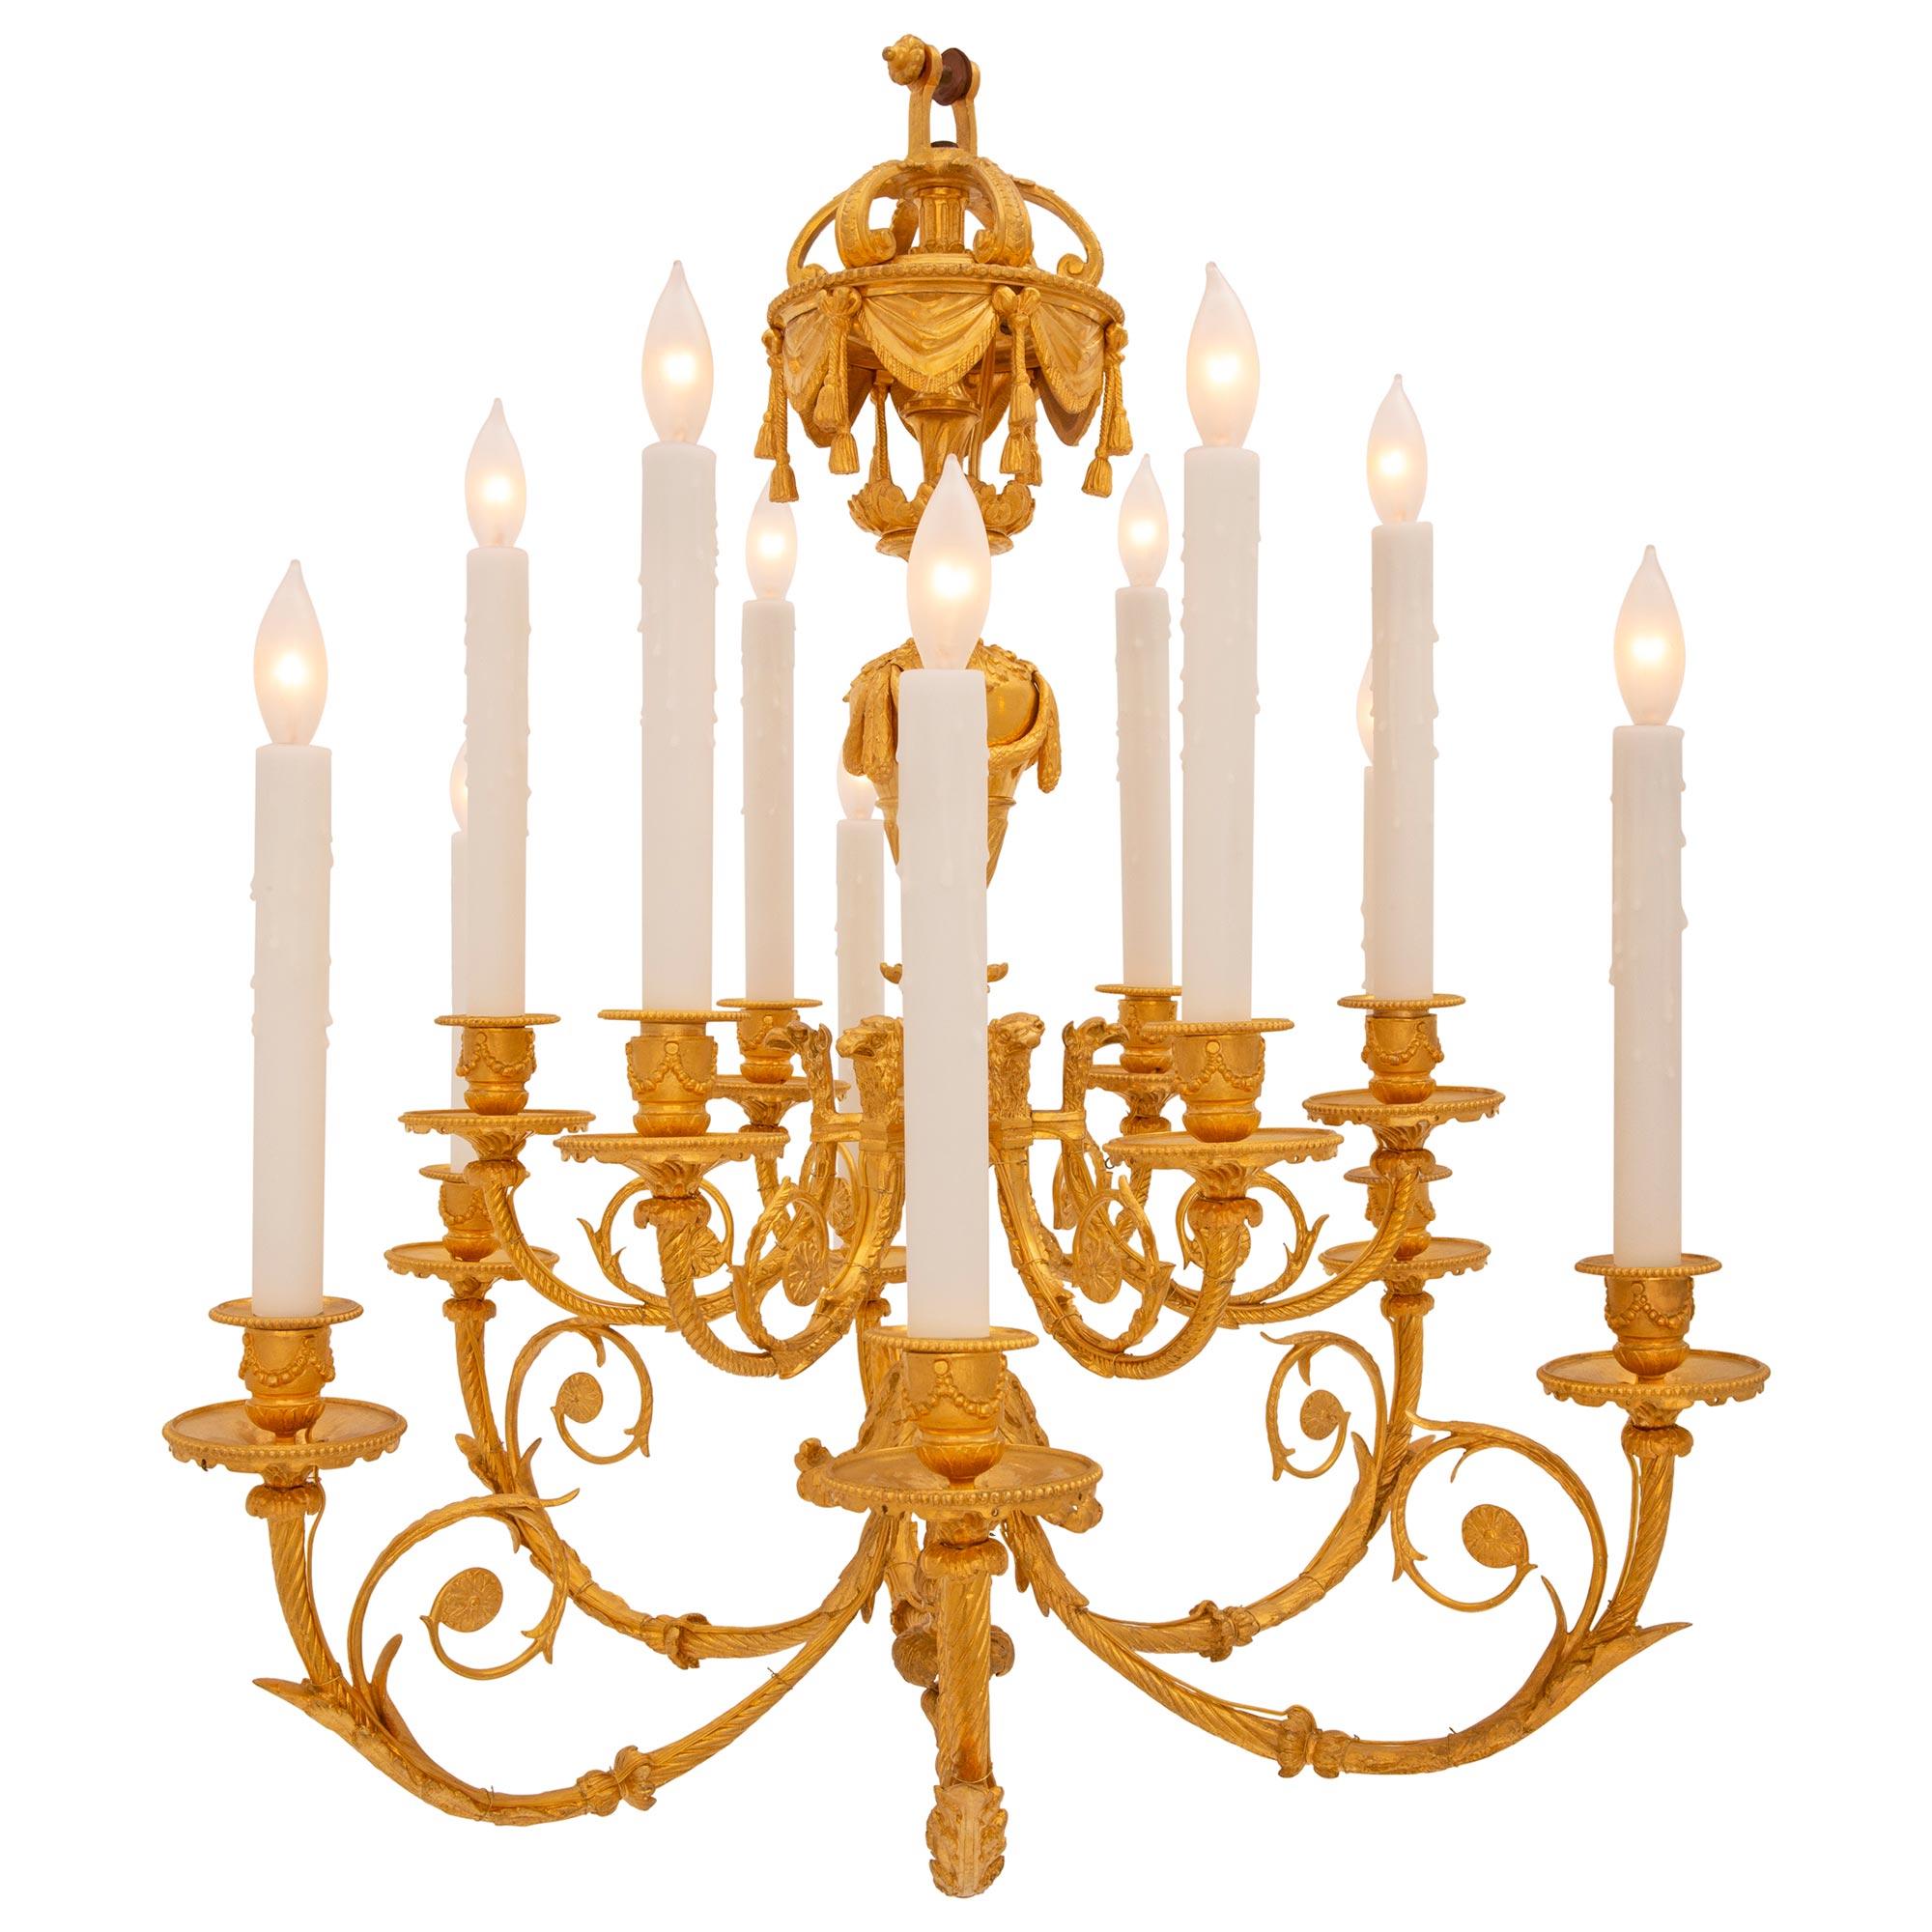 An elegant and extremely high quality French 19th century Louis XVI st. ormolu chandelier. The twelve arm chandelier is centered by a lovely bottom foliate finial below the central fut adorned with richly chased acanthus leaves. The arms are